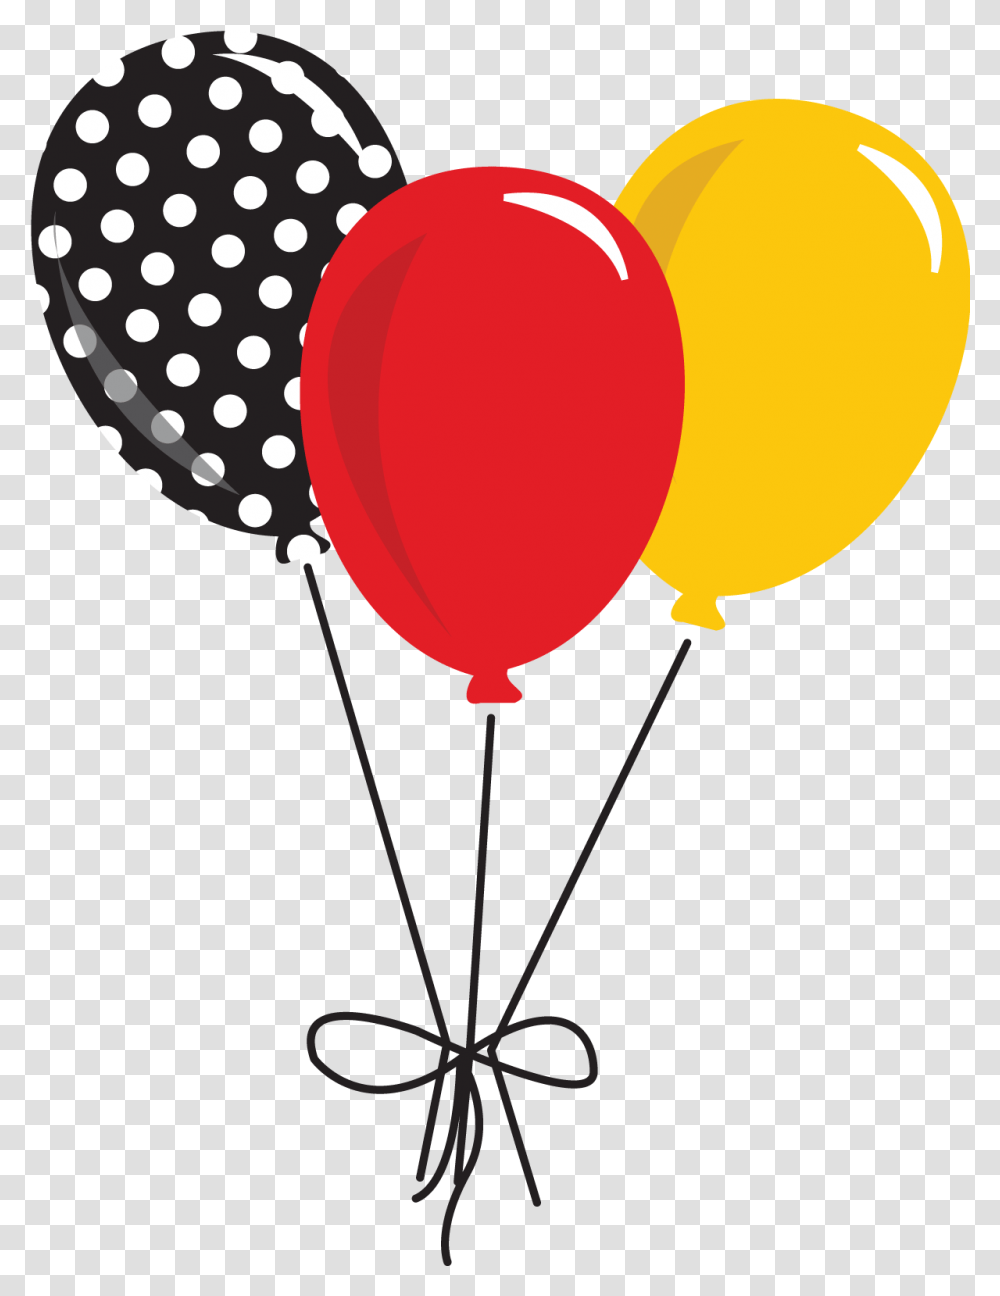 Balloons Mickey Mouse Baloes Minnie Vermelha, Lamp Transparent Png